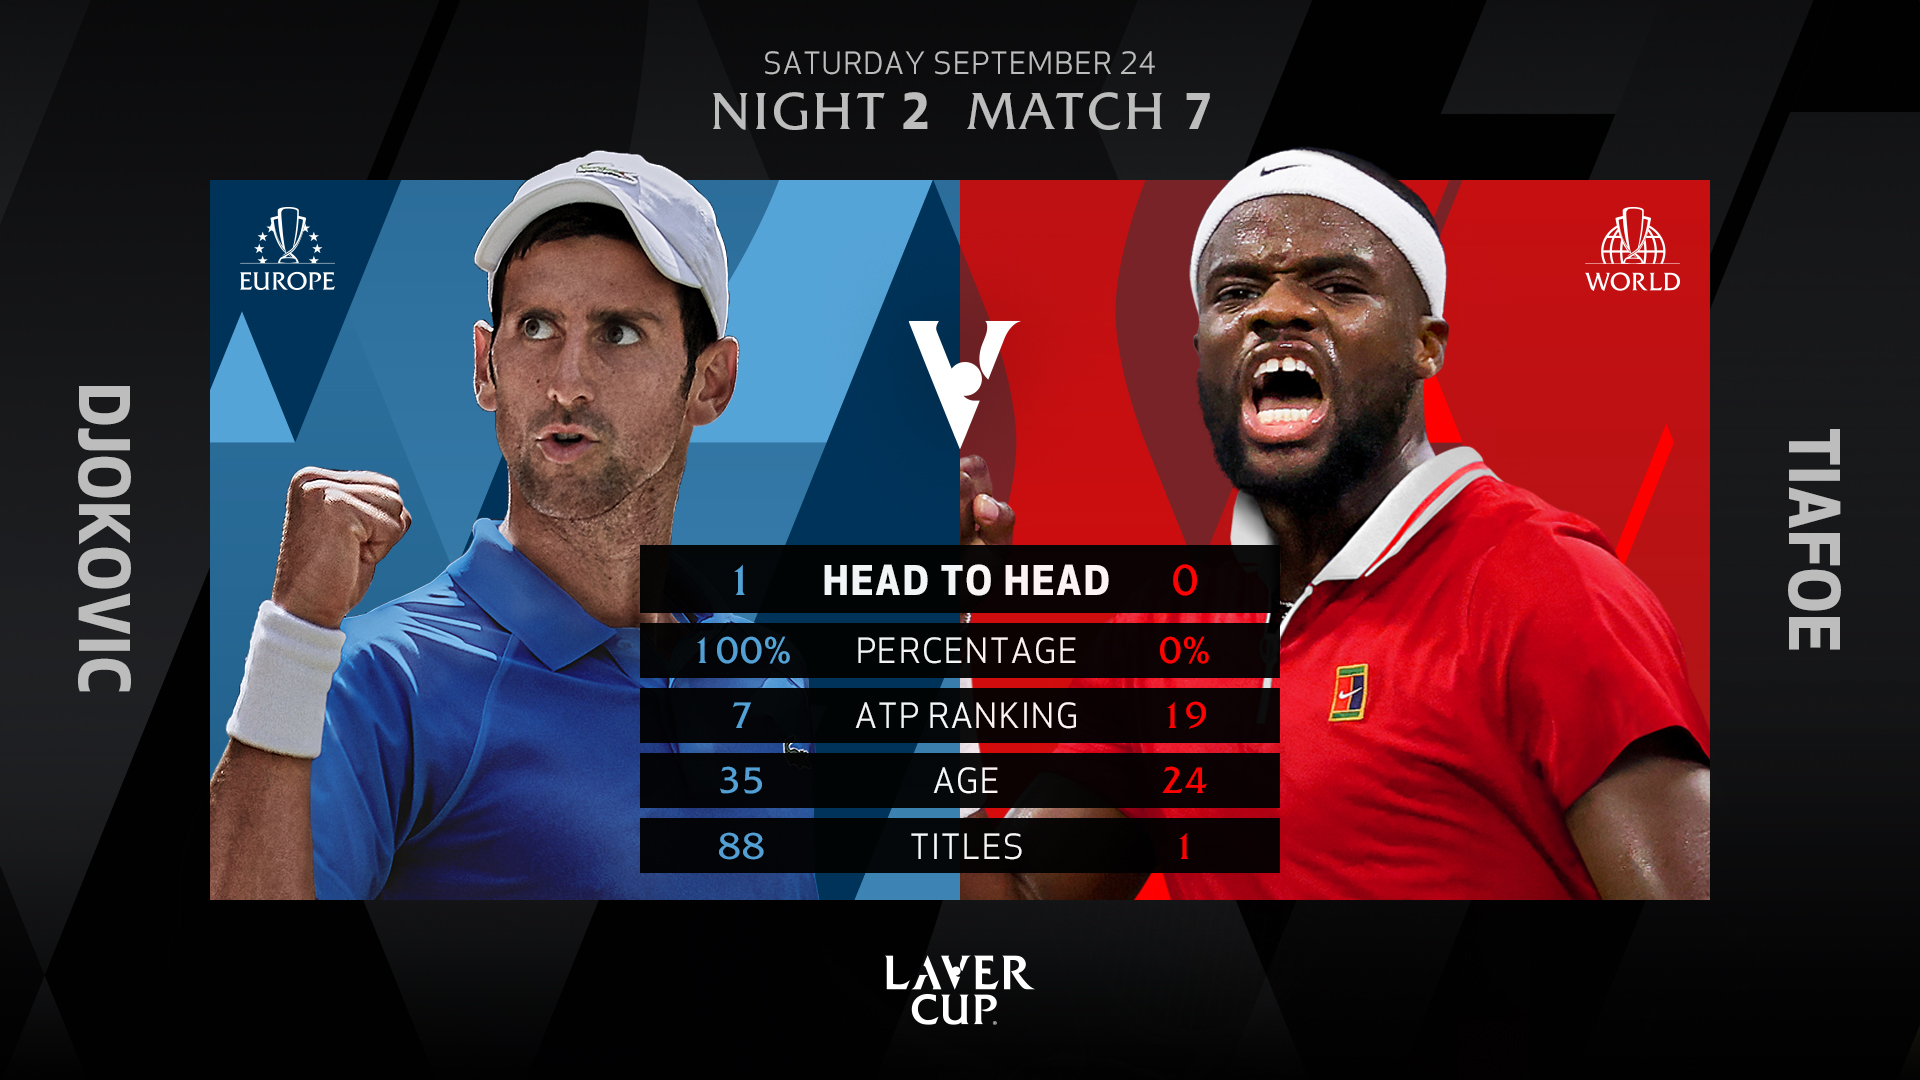 Double duty as Djokovic returns to action